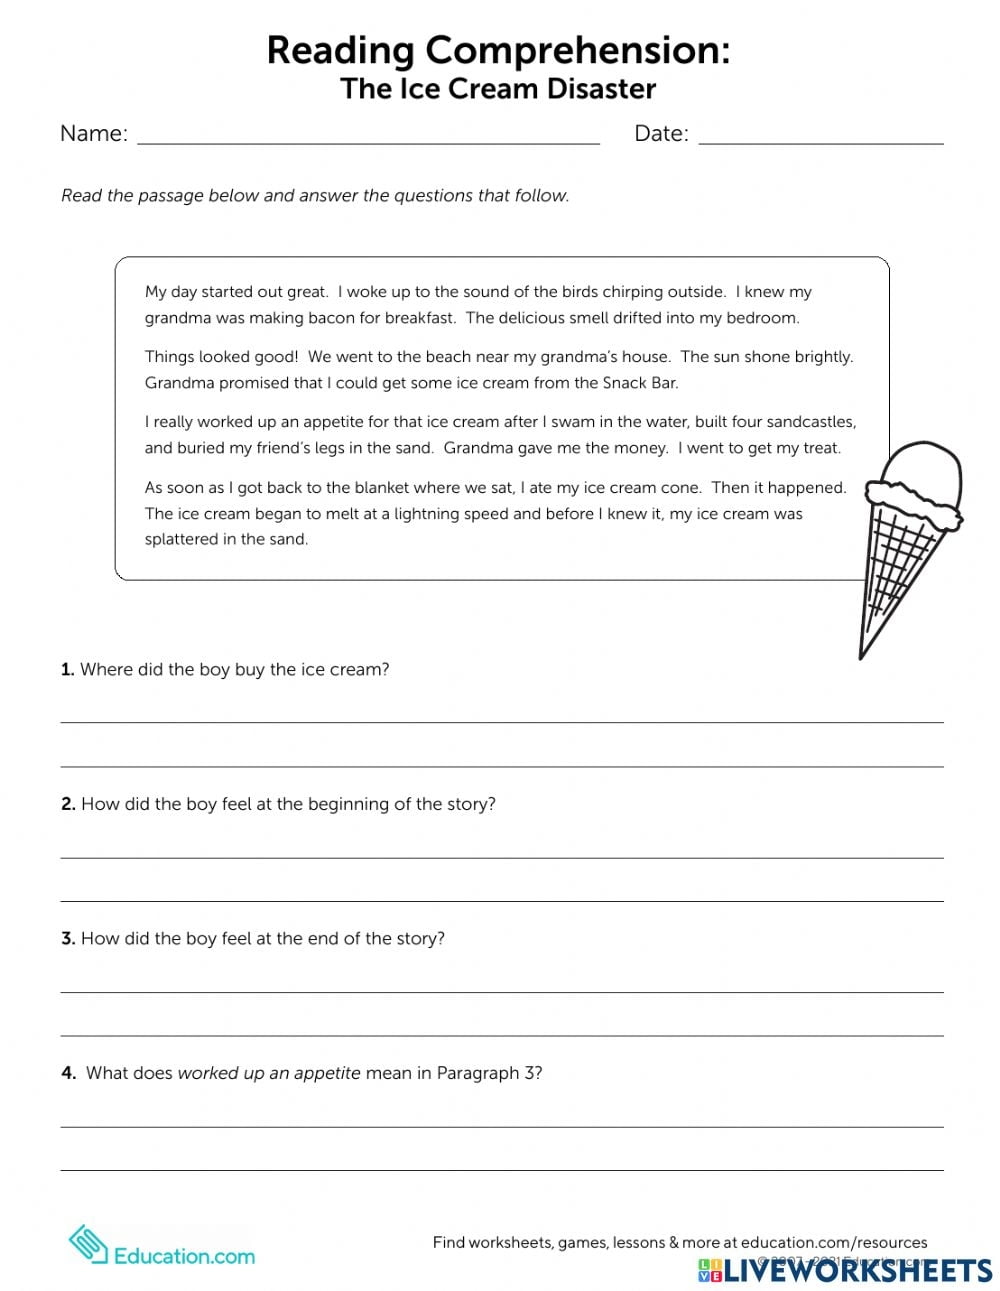 reading comprehension exercises for third graders